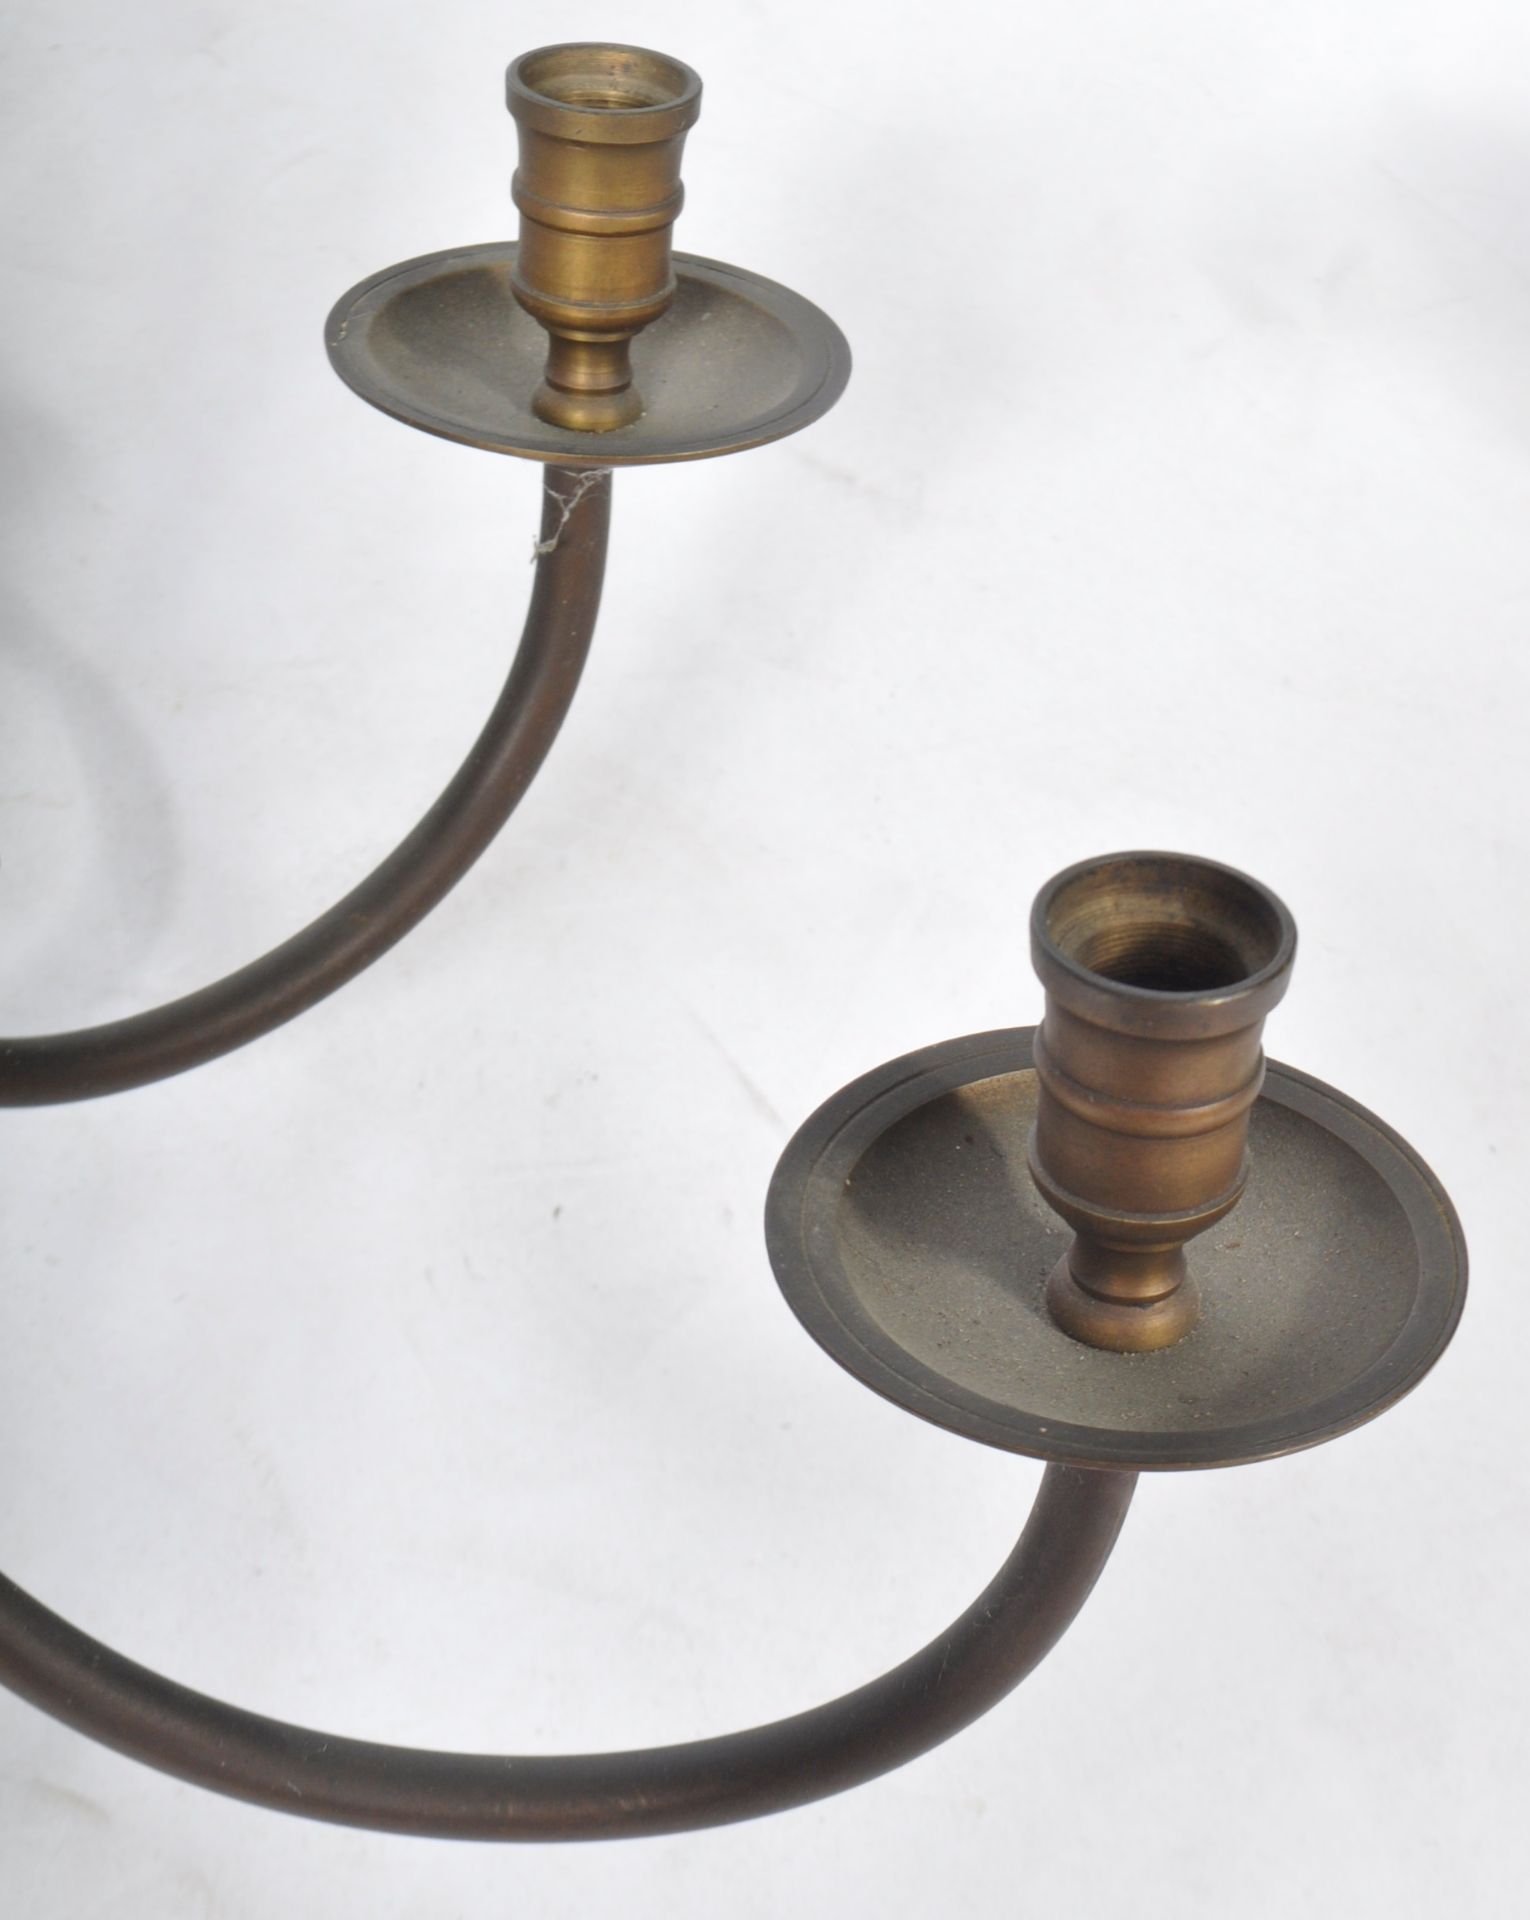 EARLY 20TH CENTURY DUTCH BRASS CEILING LAMP - Image 4 of 6